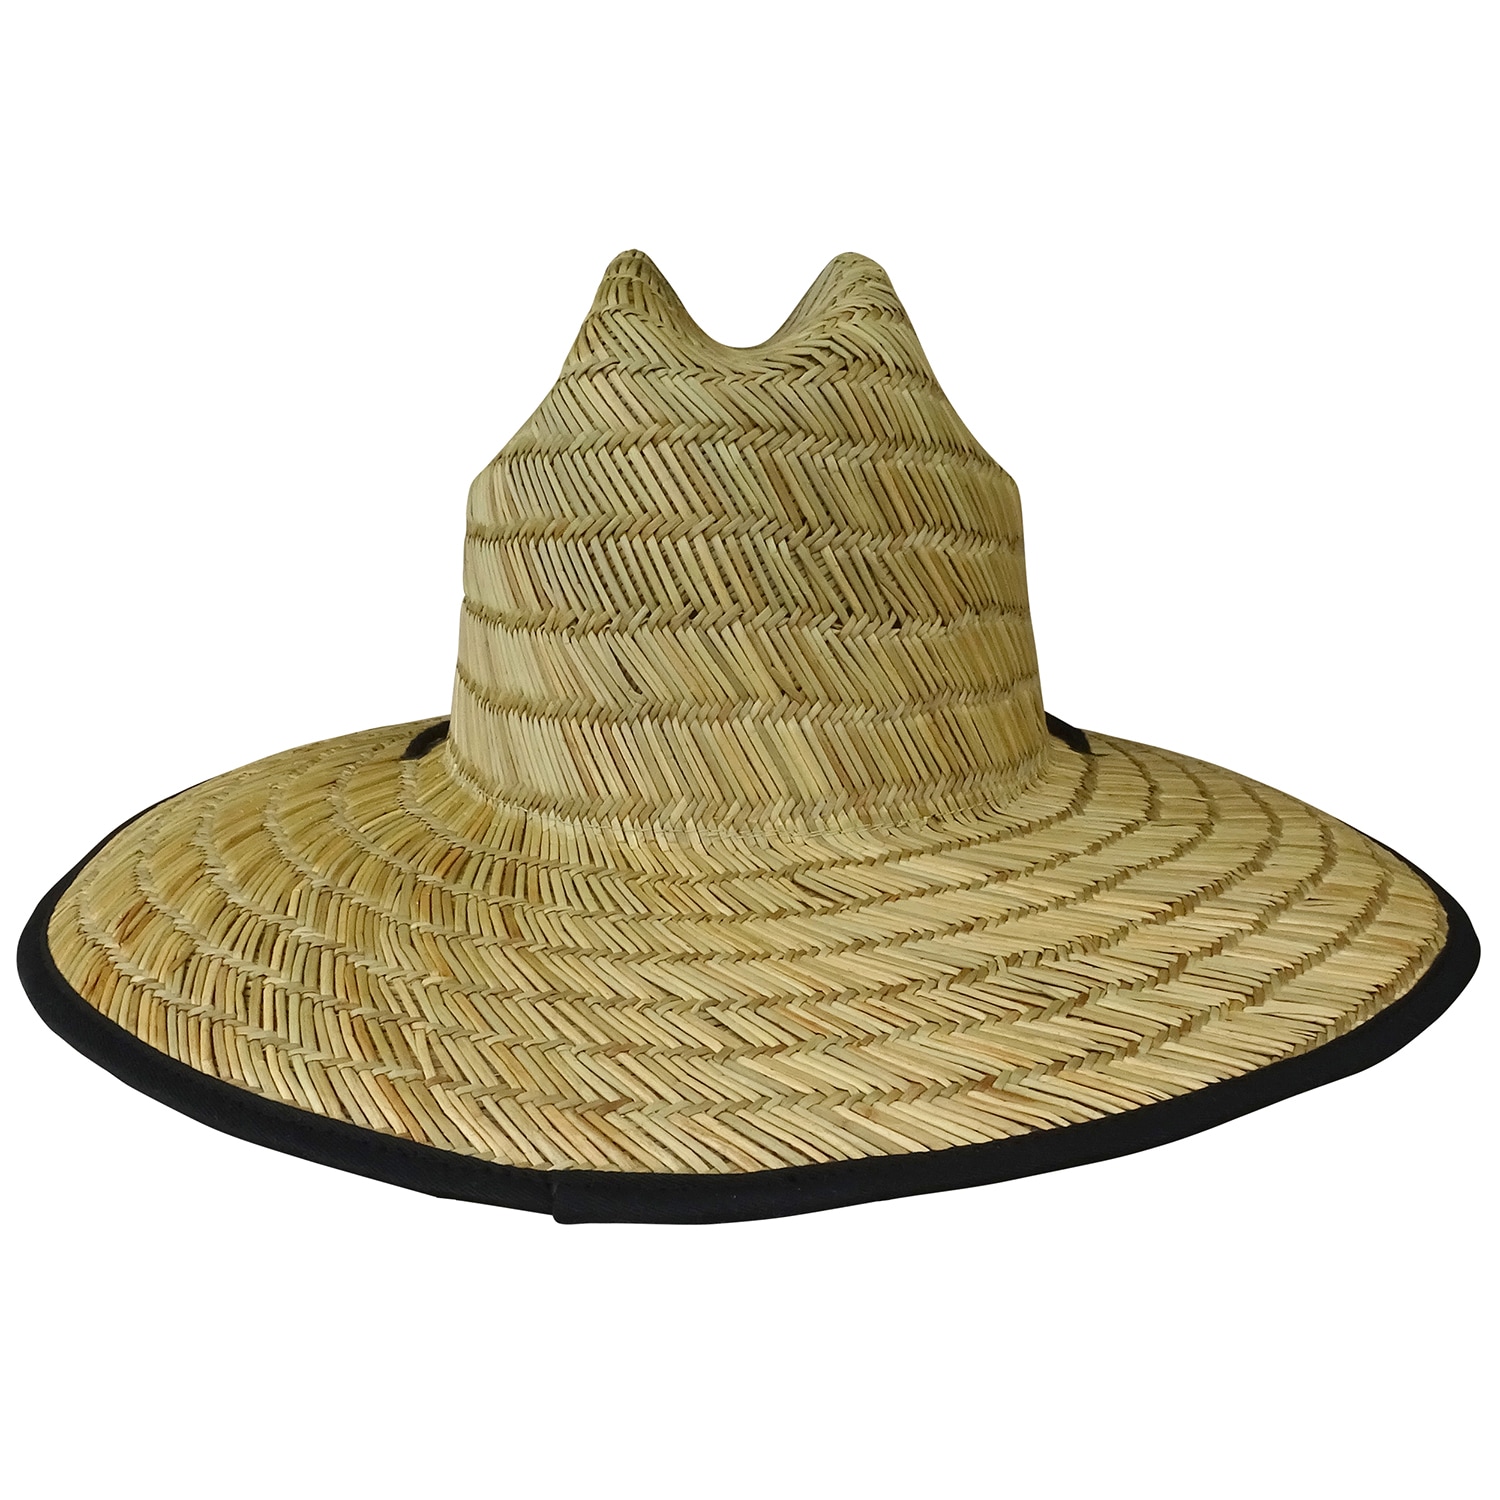 Infinity Brands Mens Straw Hat with Black Brim Binding in the Hats 